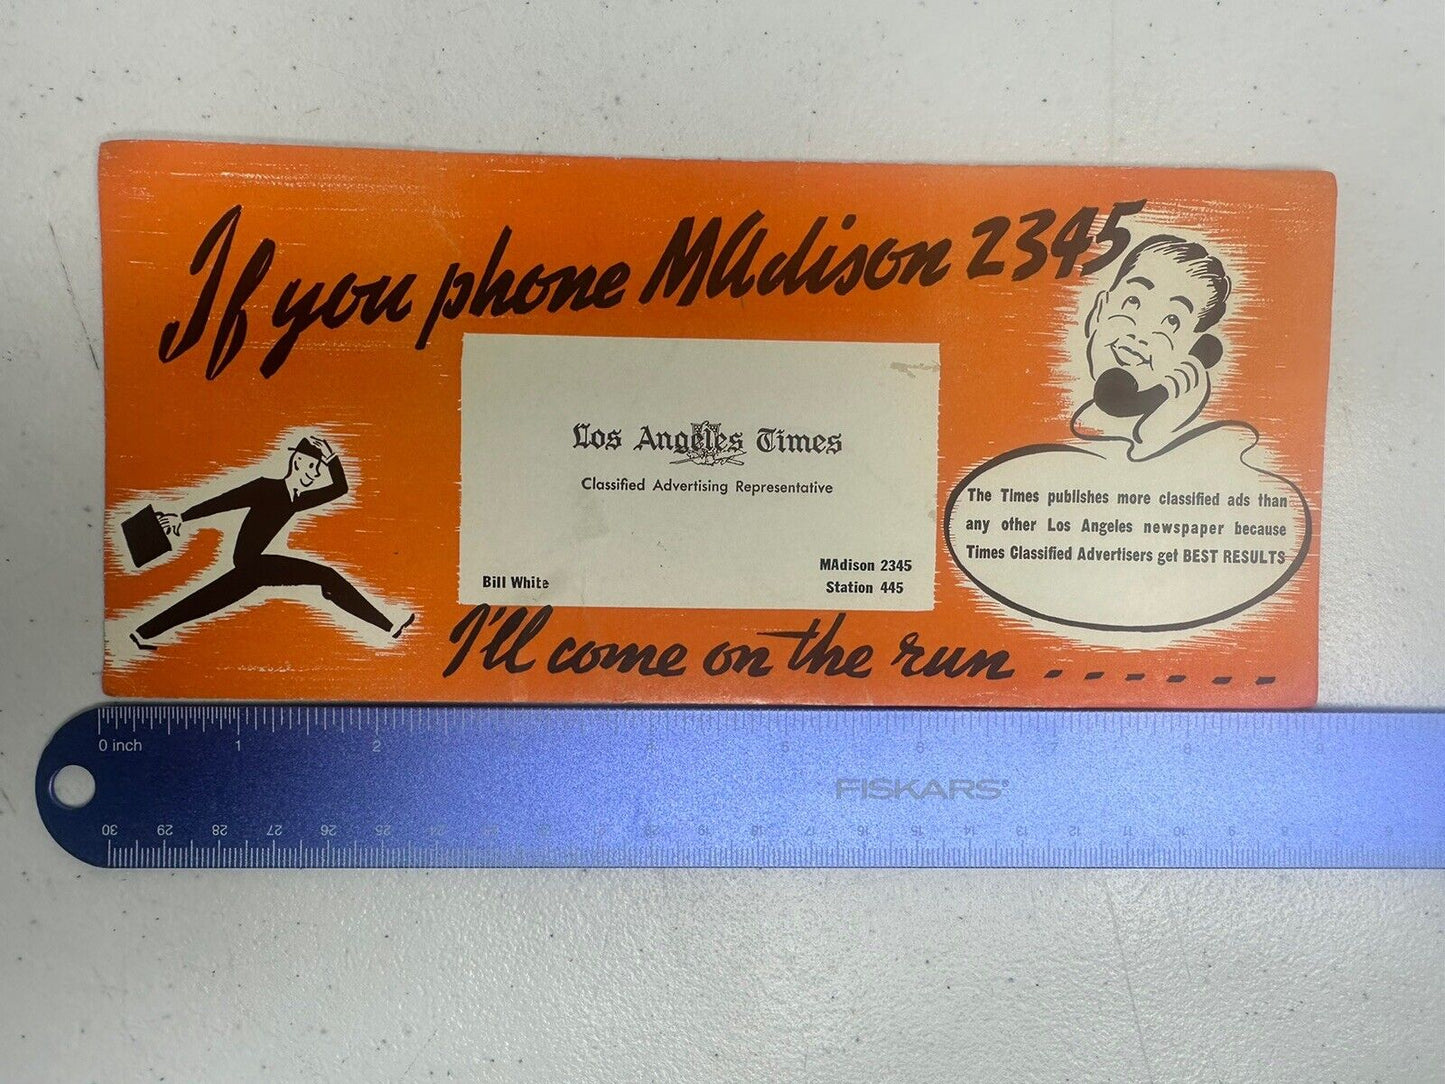 Vintage 1950s Los Angeles Times Business Card - Mid-Century Media Collectible with Original Madison 2345 Ad - TreasuTiques